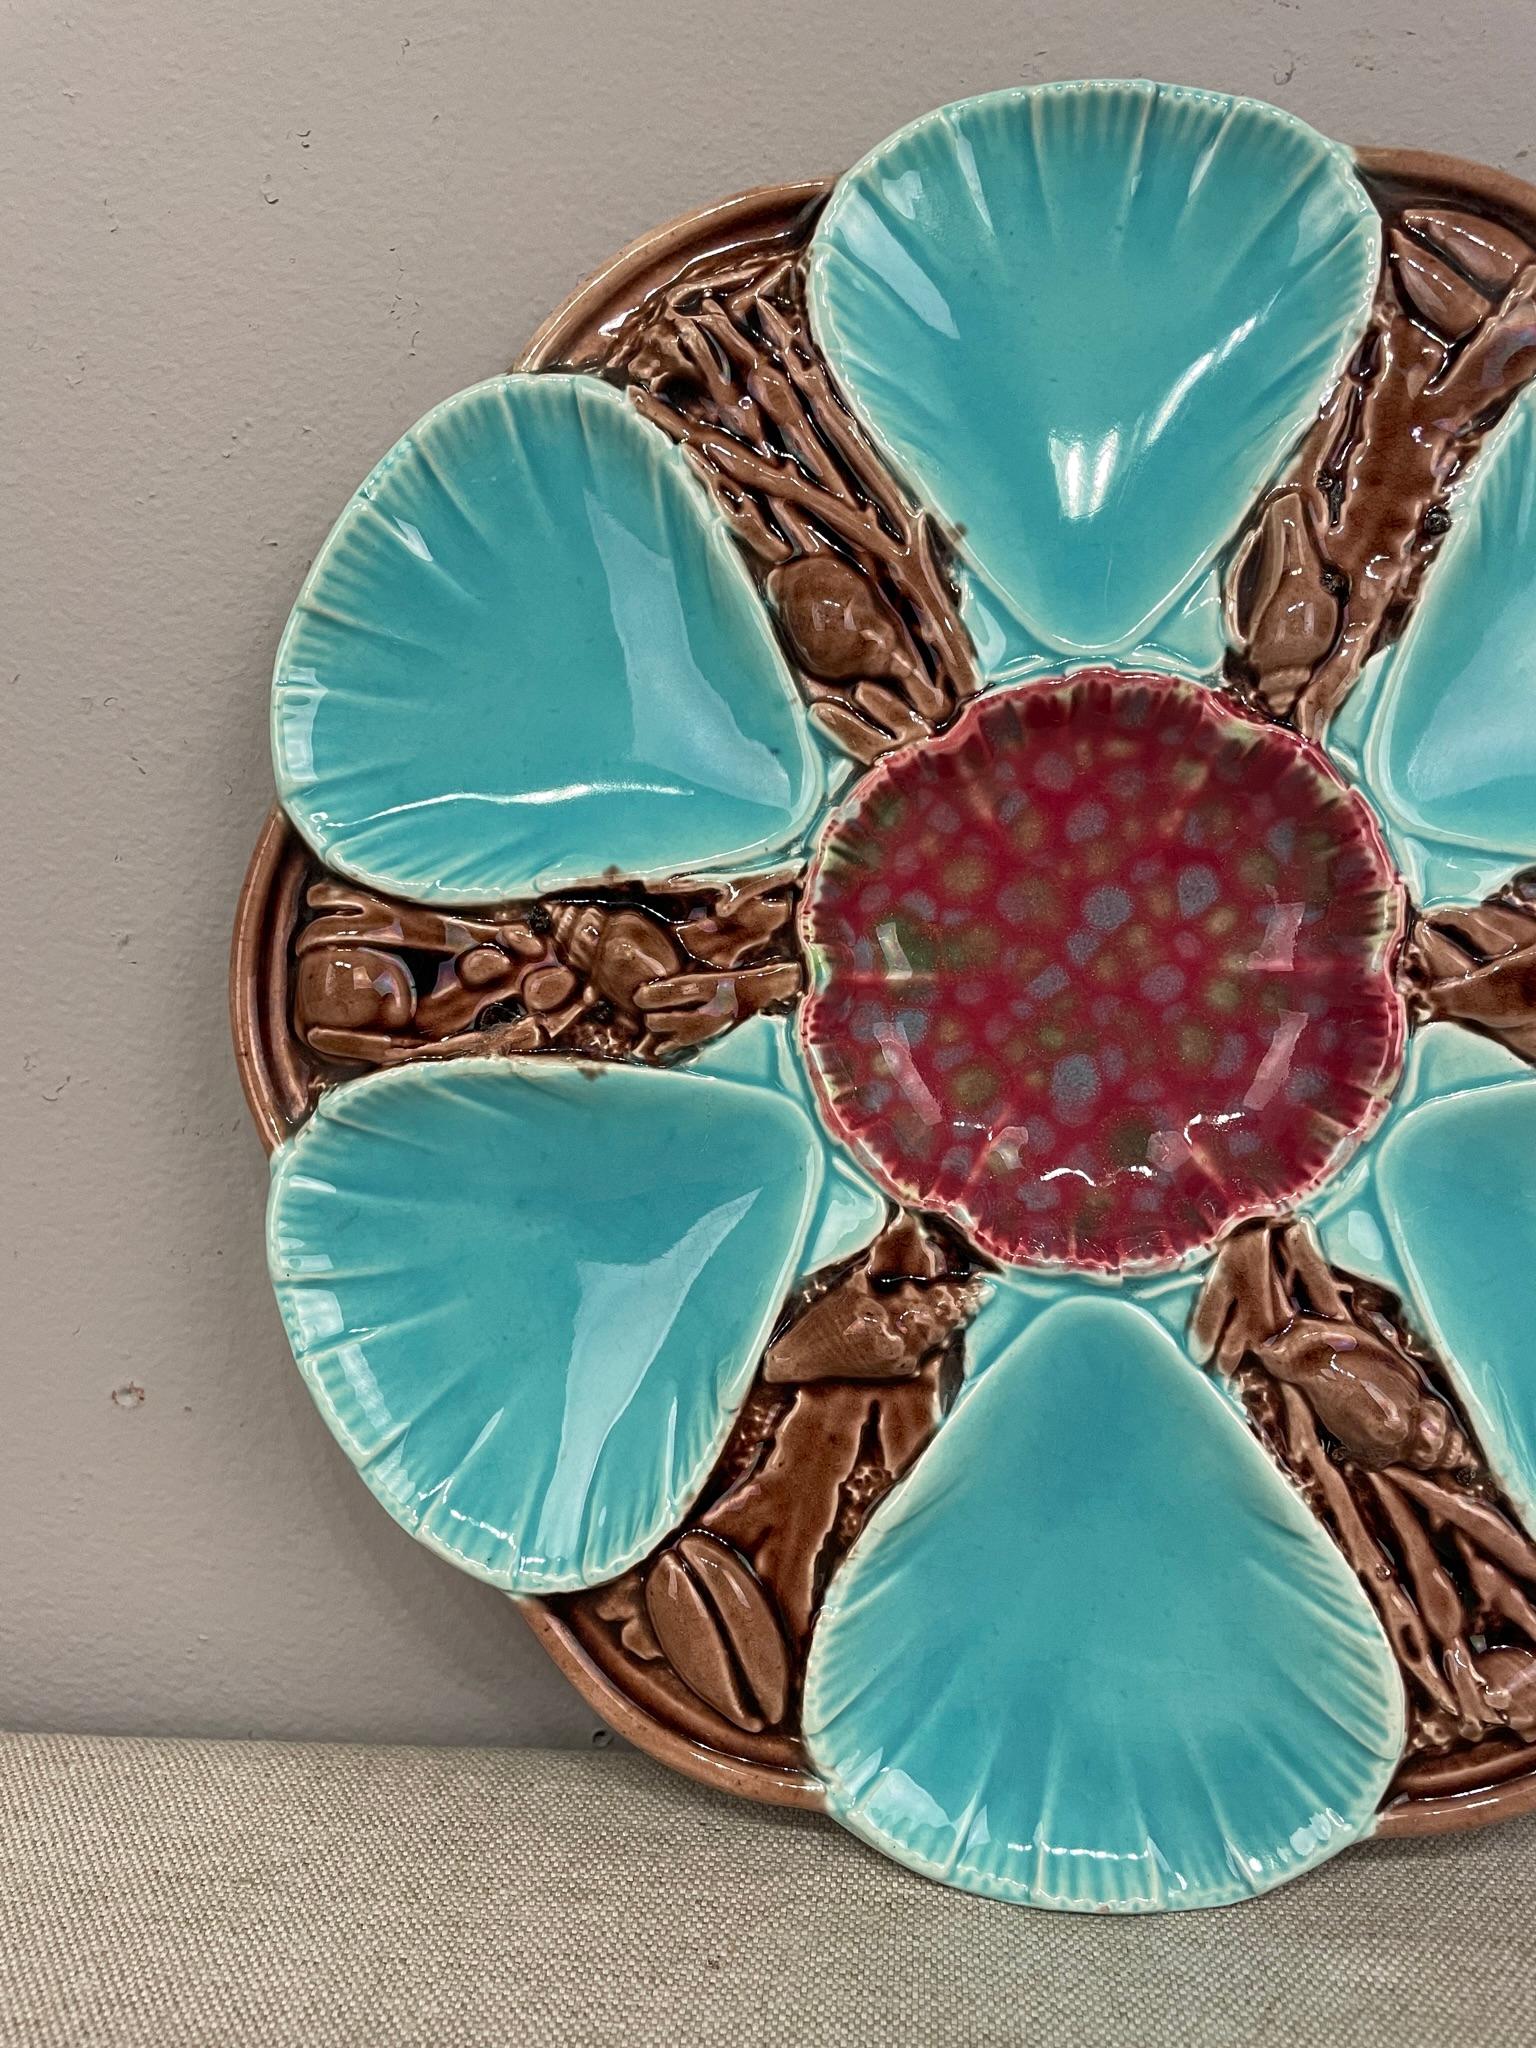 19th C. English Majolica 6 Wells Oyster Plate In Good Condition For Sale In Winter Park, FL